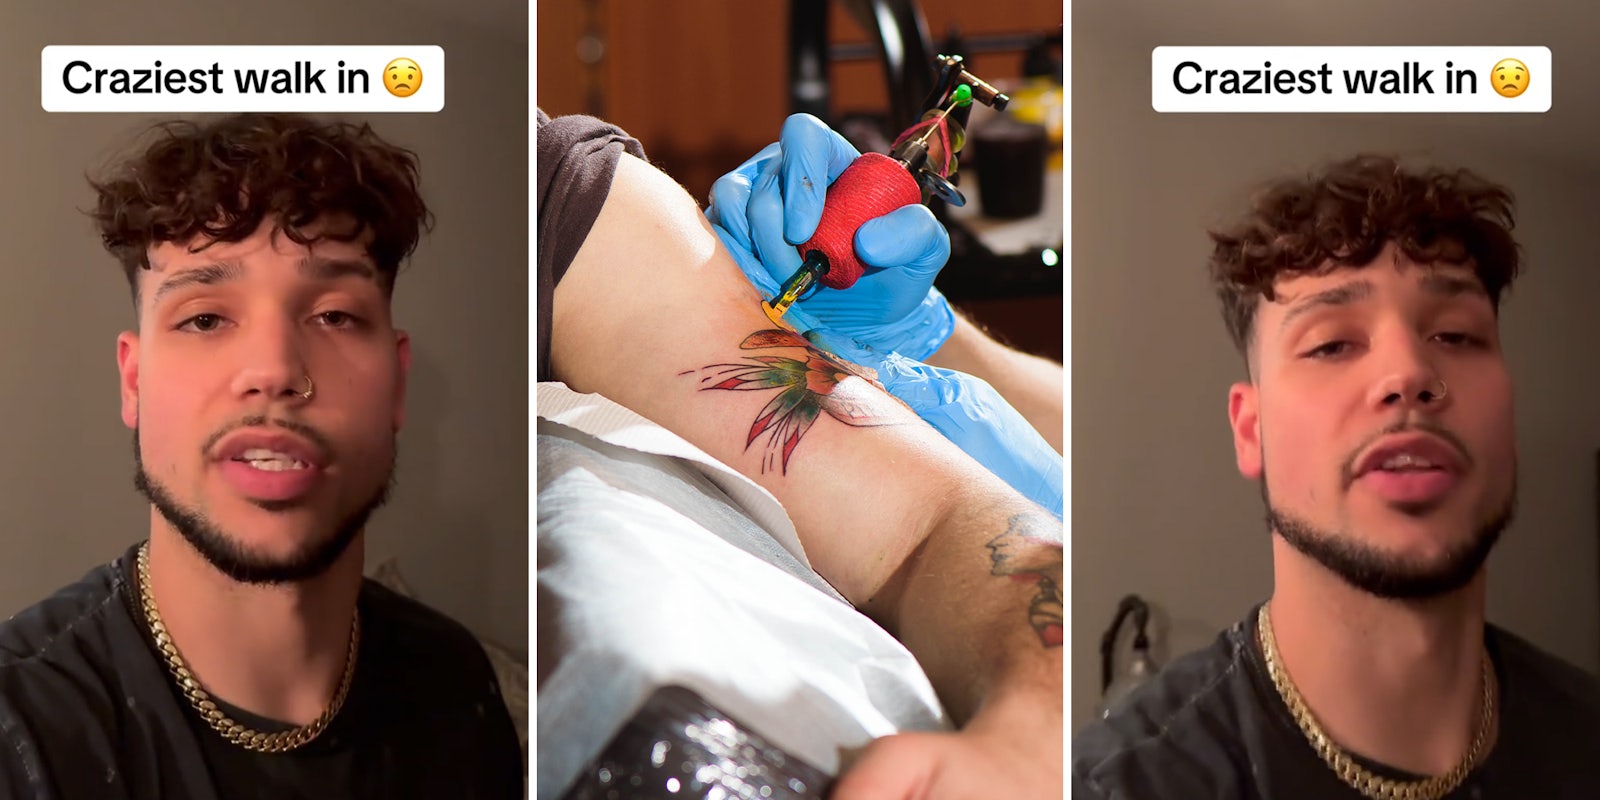 Tattoo artist says he's never taking walk-ins again after customer came in without an appointment and made a wild request